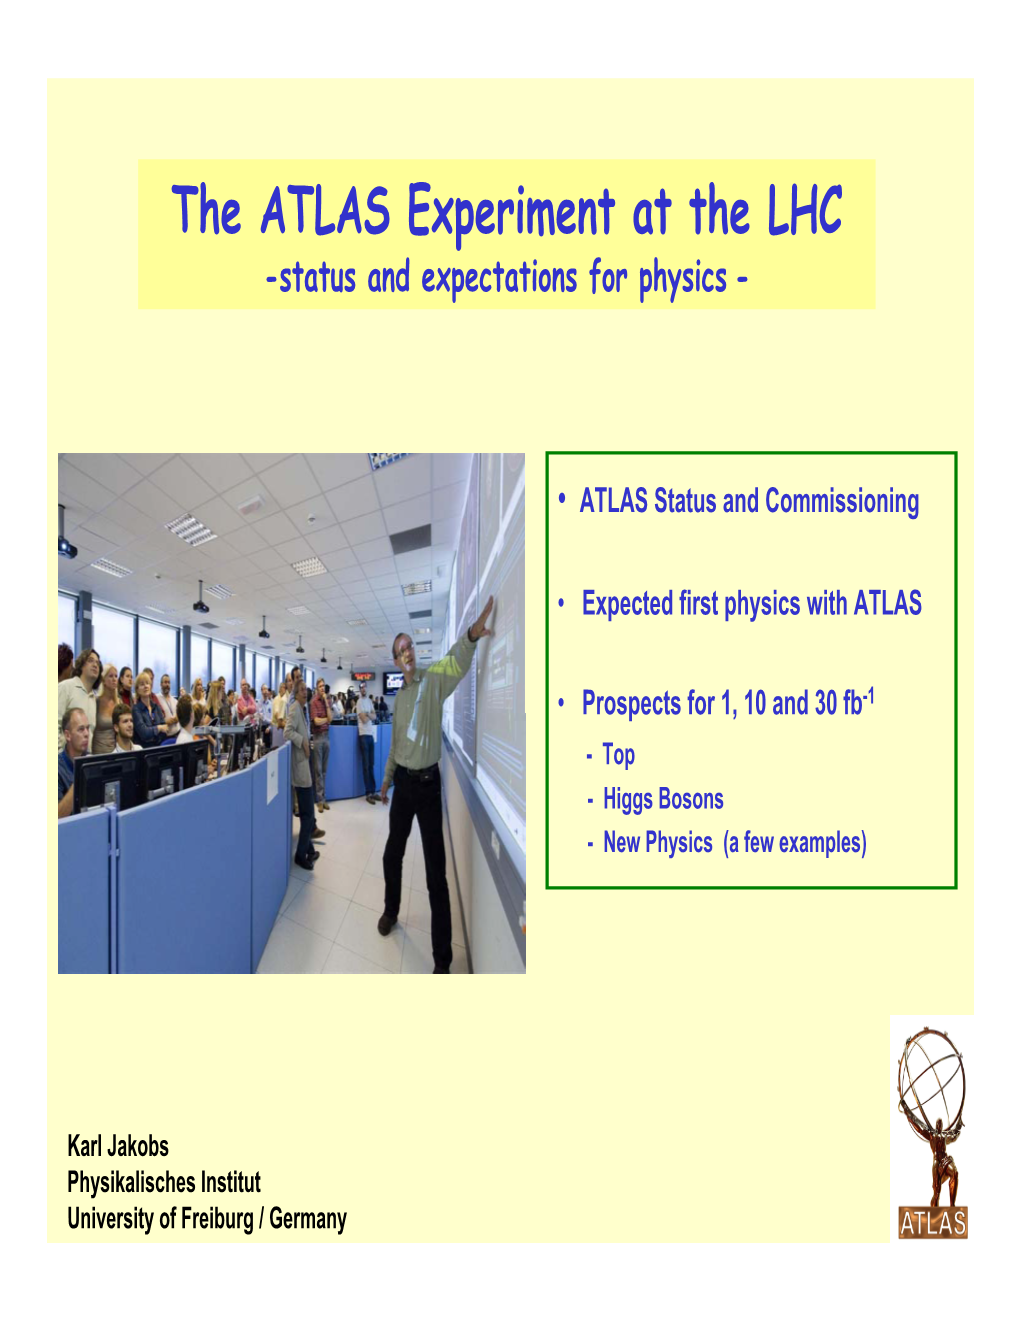 The ATLAS Experiment at the LHC -Status and Expectations for Physics